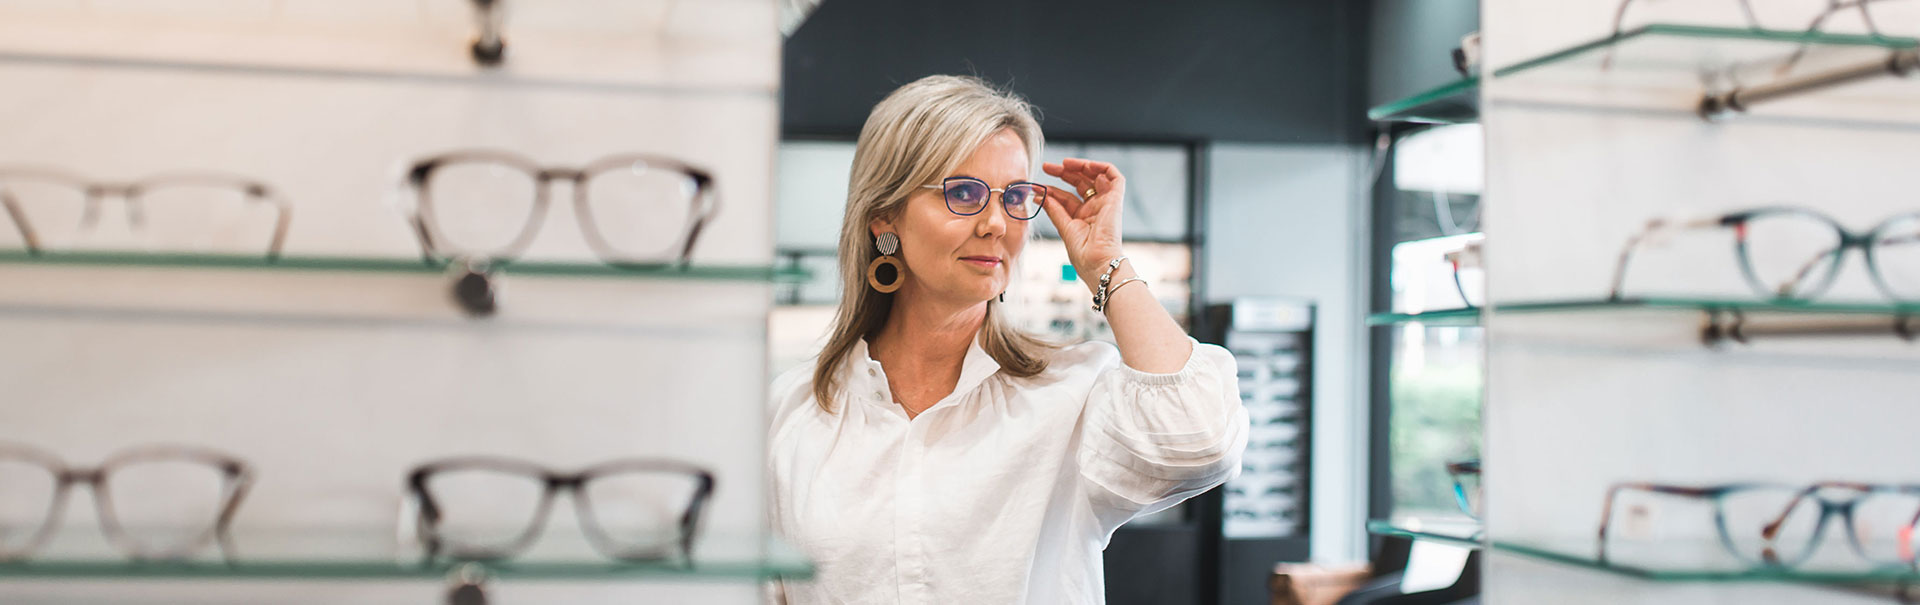 Reflection of blonde woman trying on glasses